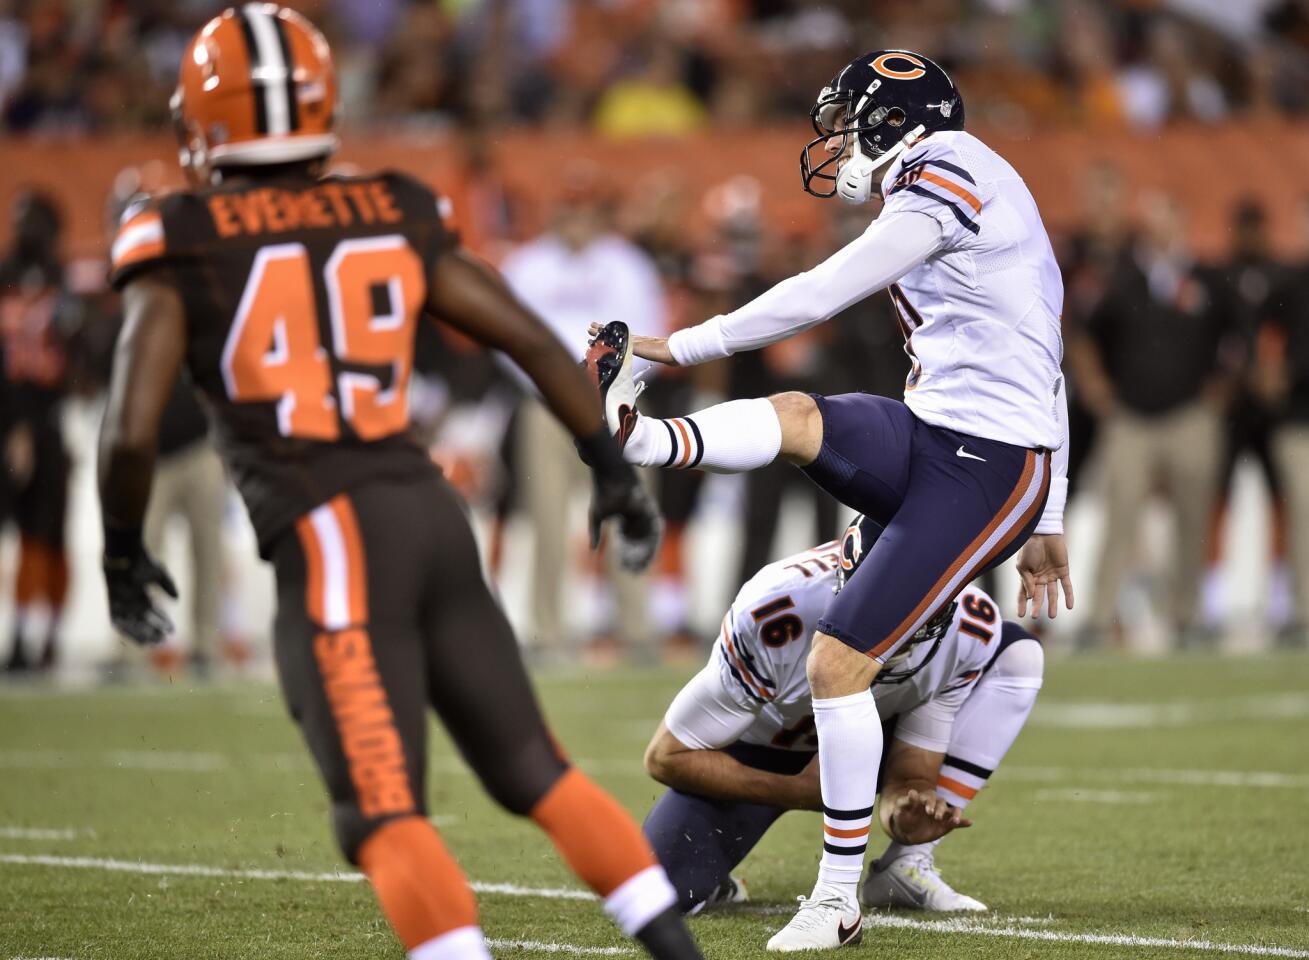 Robbie Gould kicks a field goal during the first half of an exhibition game against the Browns on Thursday, Sept. 1, 2016, in Cleveland.